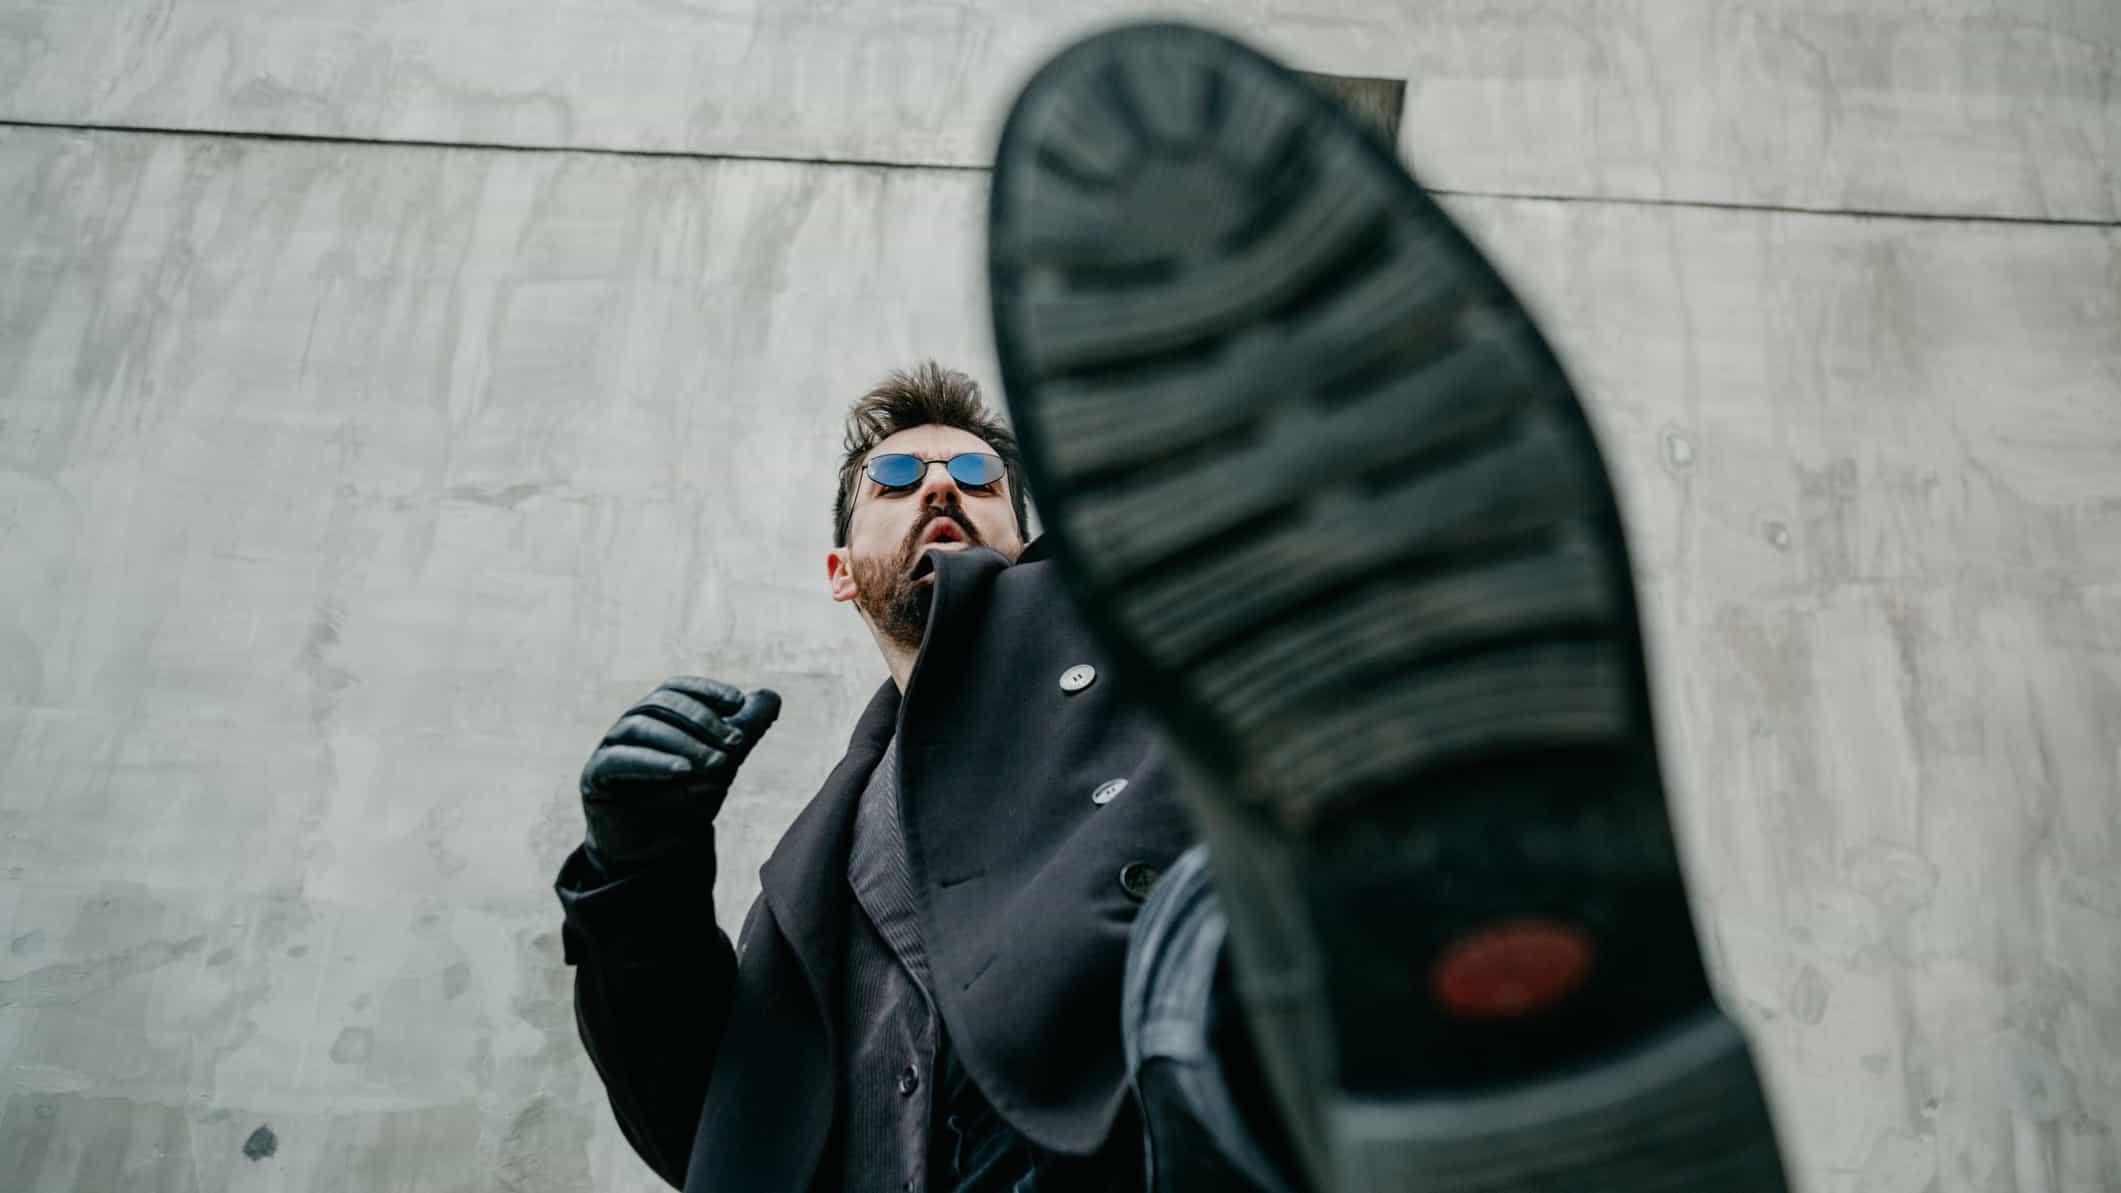 A picture taken from ground level focussing on the underside of a man's boot with the stylishly dressed man in the background wearing black amid a cold concrete background.